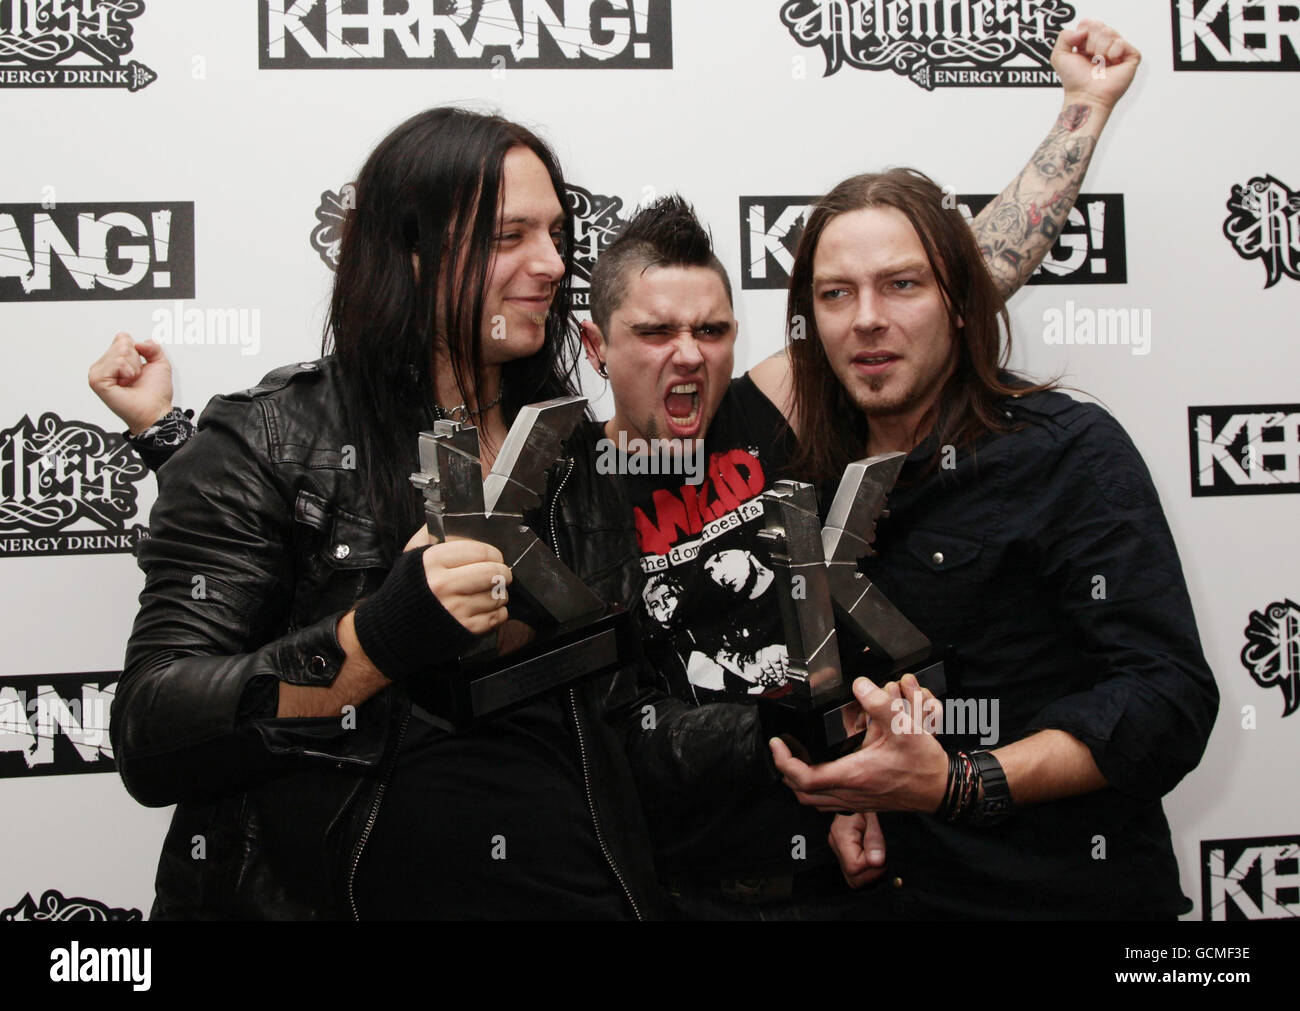 Bullet For My Valentine (left - right) Matthew Tuck, Jason James and Michael Paget with their Best British Band and Best Live Awards at The Relentless Energy Drink Kerrang! Awards at The Brewery, London. Stock Photo